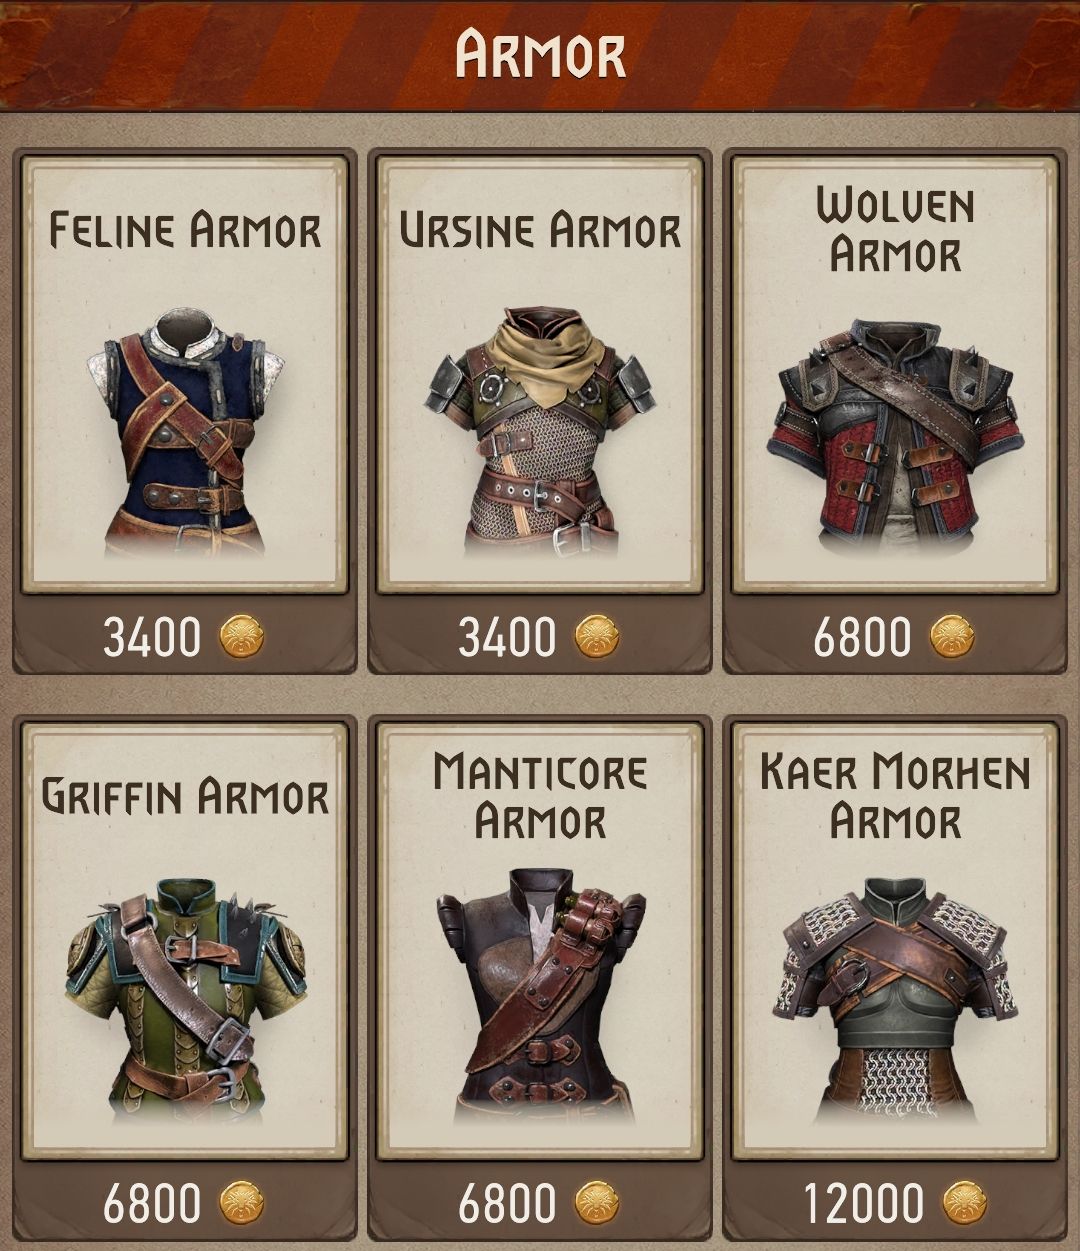 Shop-equipment-armor-The-Witcher-Monster-Slayer-cropped